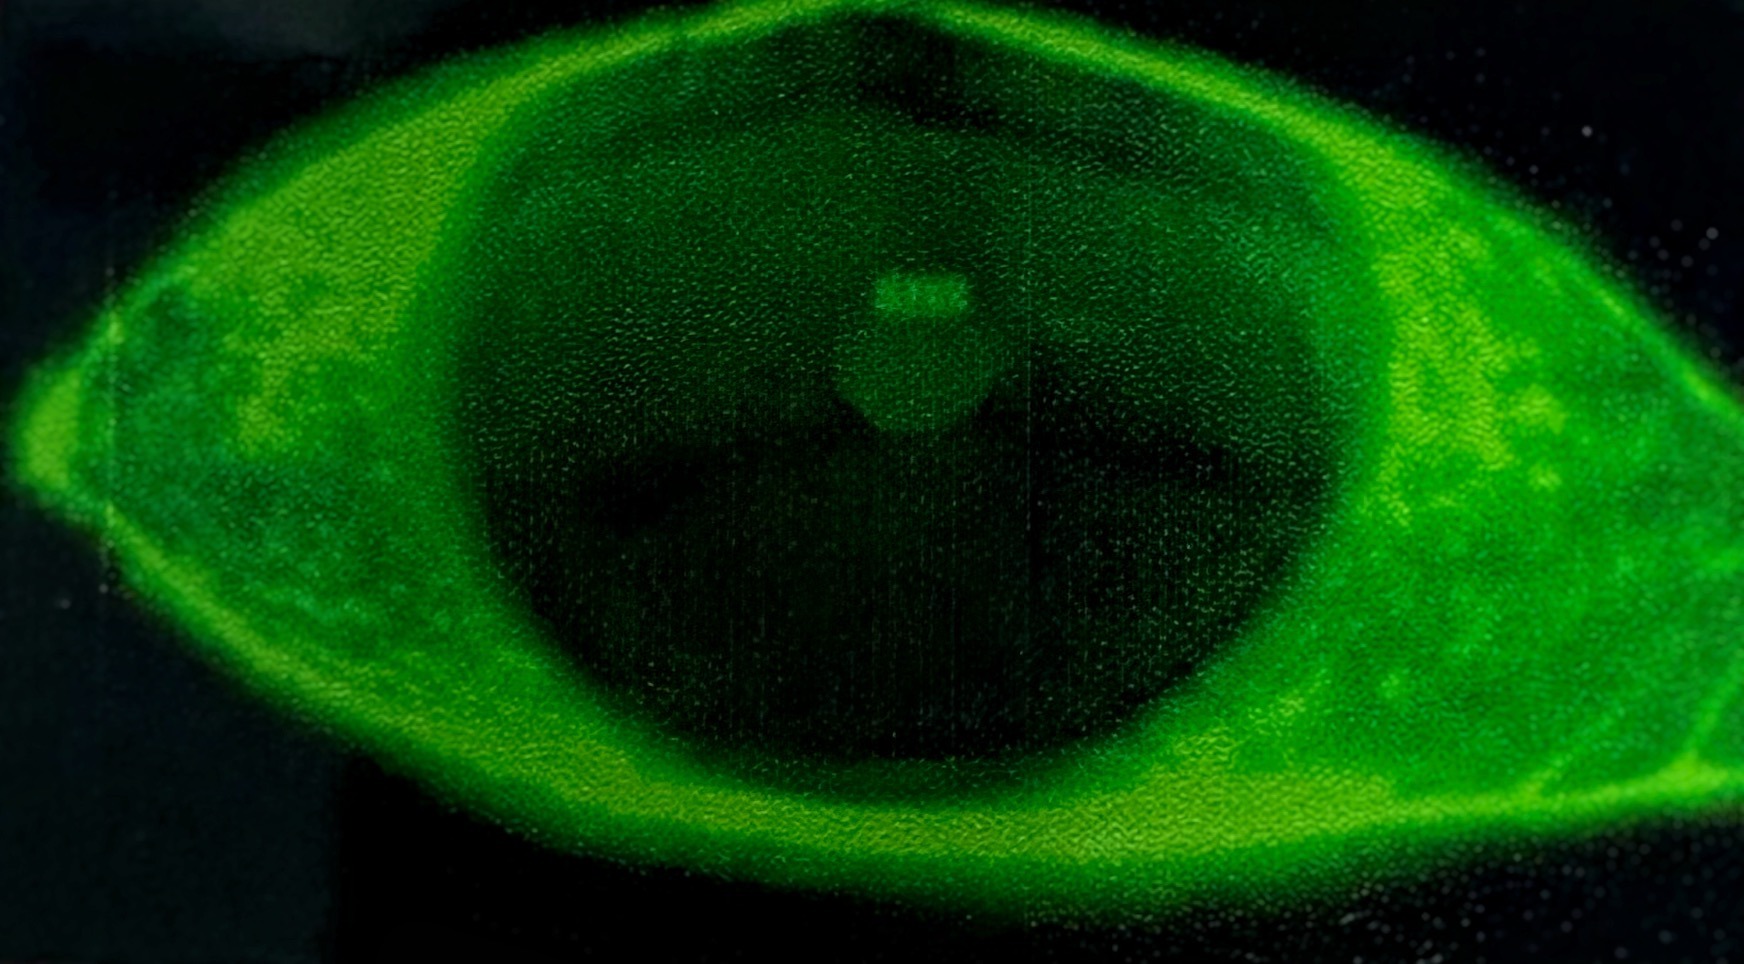 Fluorescein used to stain a dry eye.